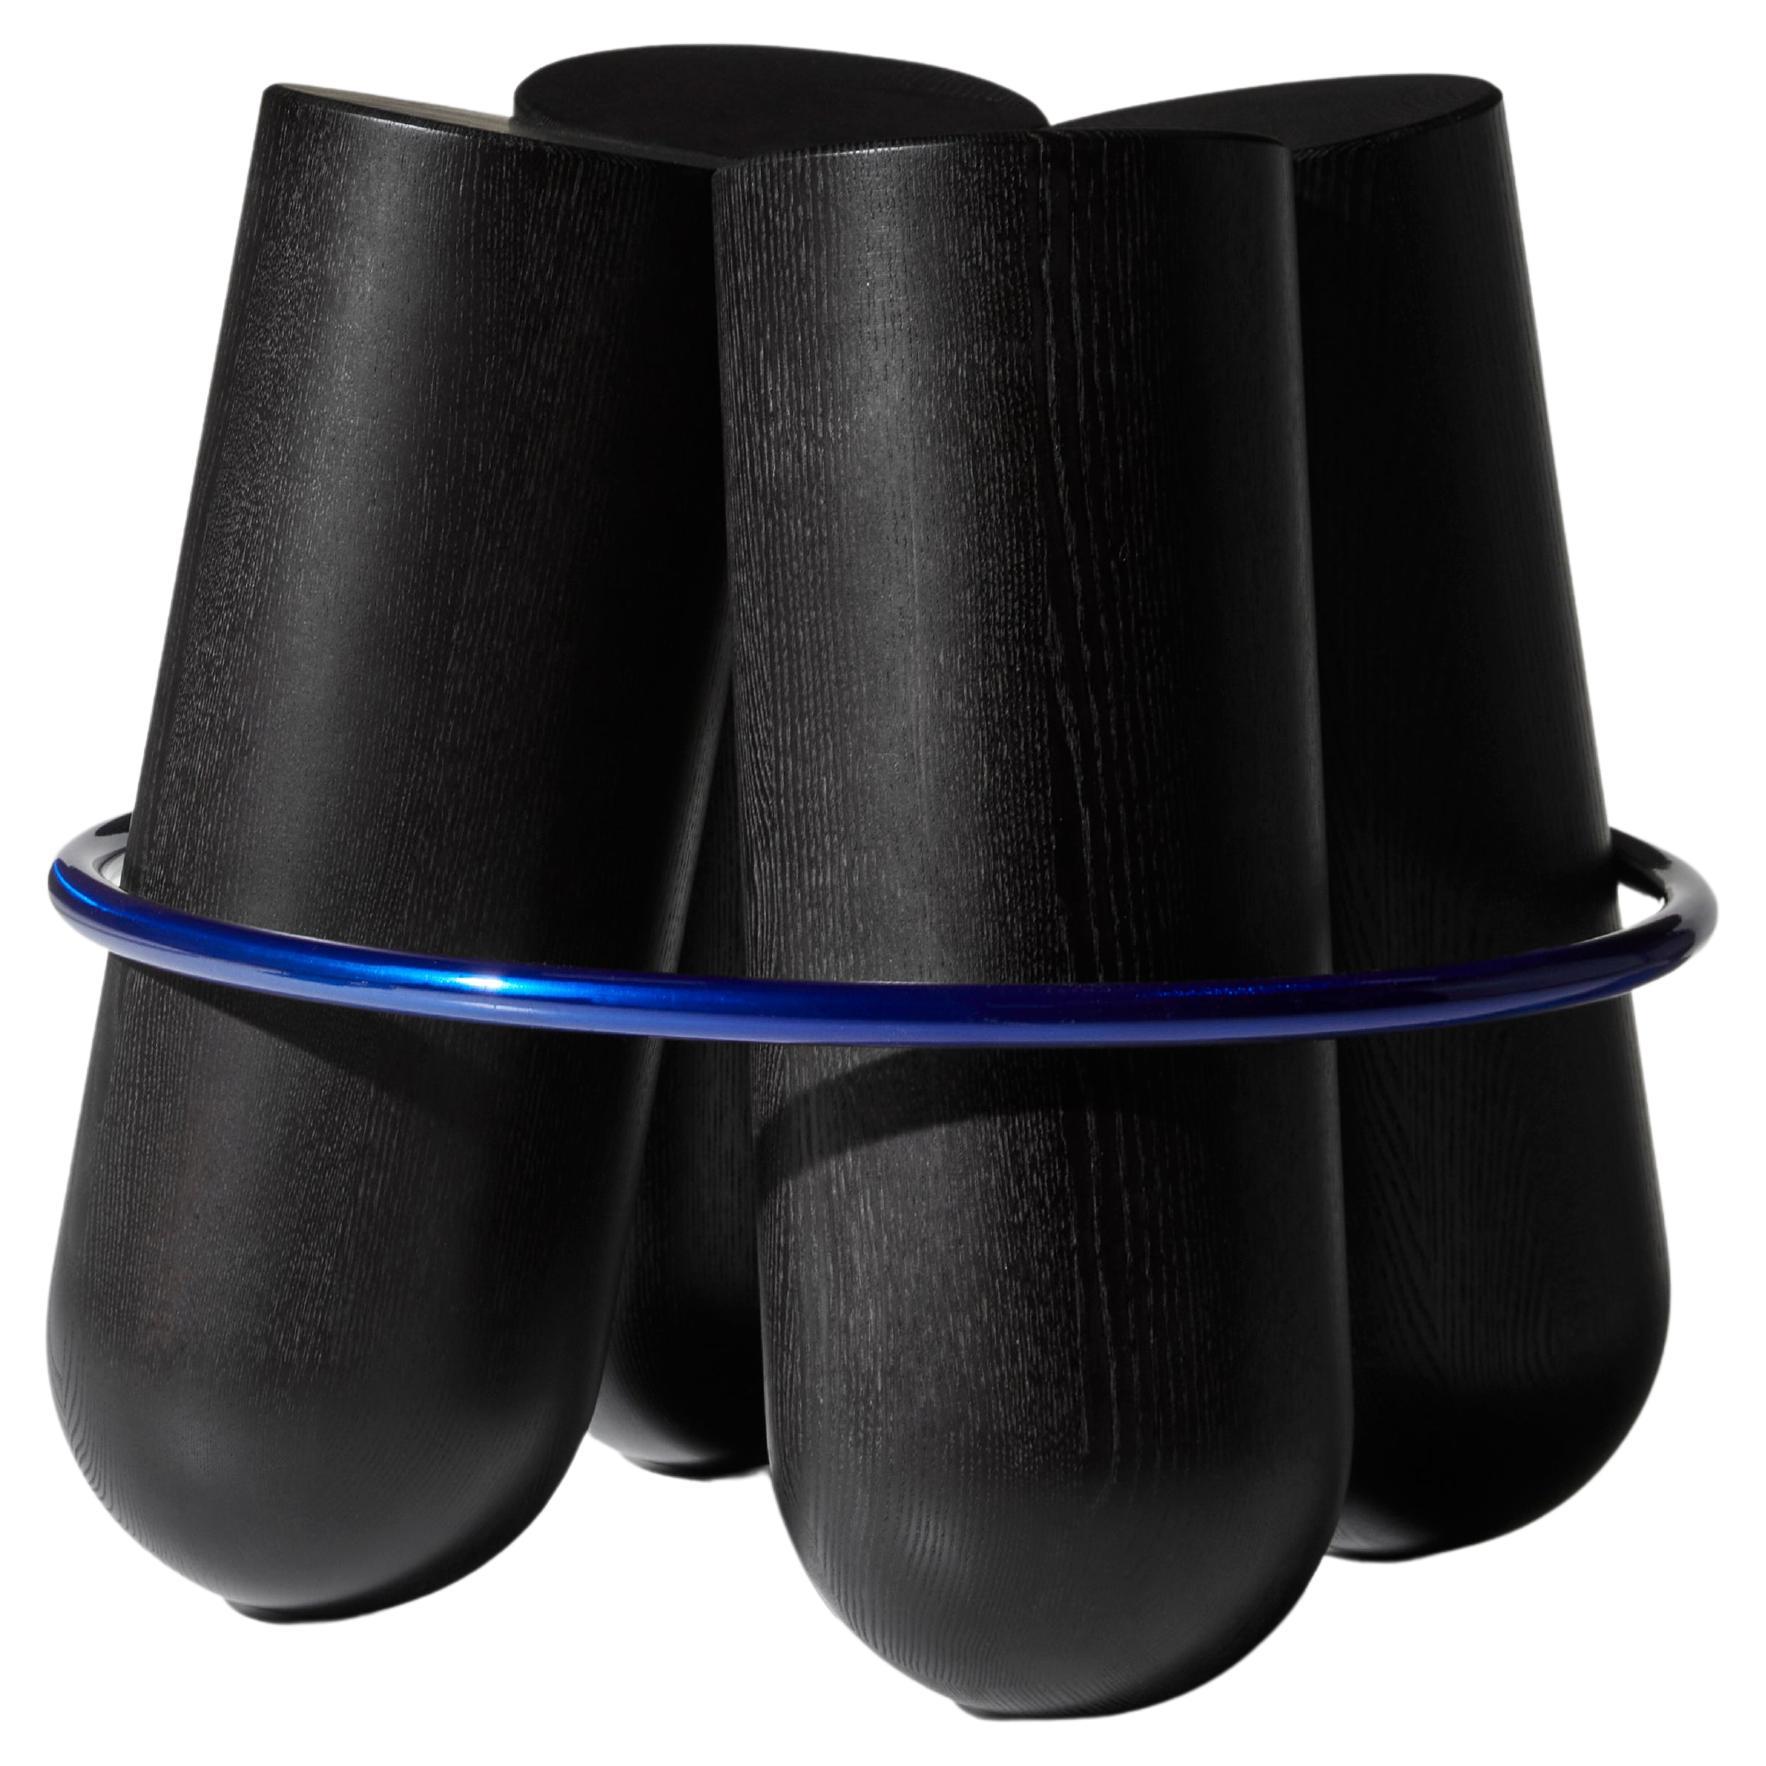 Bolt Stool, Black and Lazer Blue Ring, by Note Design Studio for La Chance For Sale